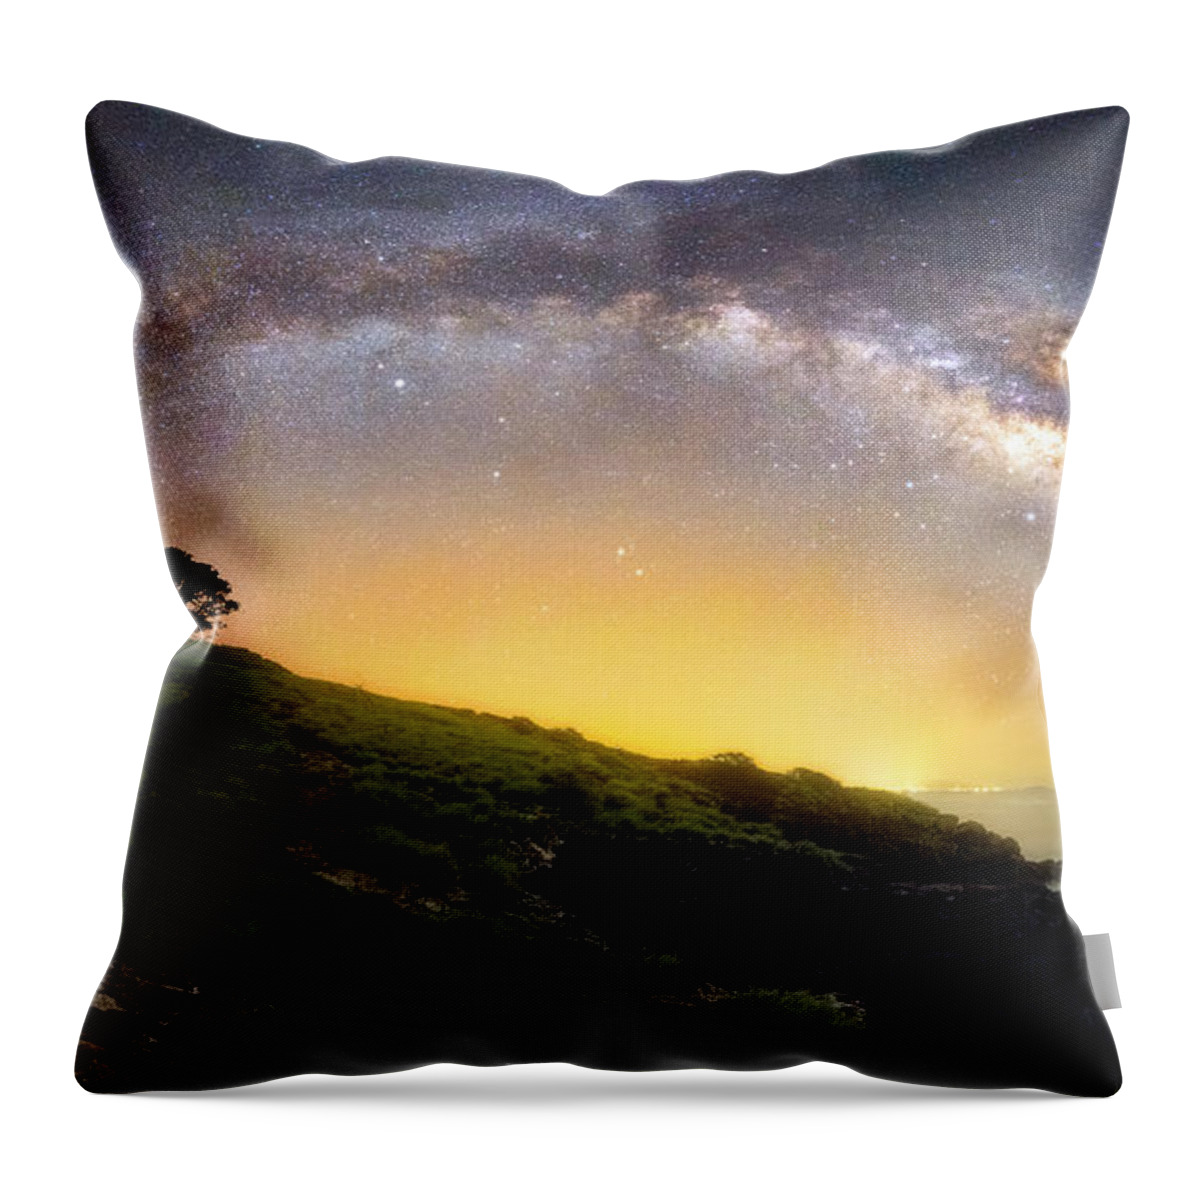  Throw Pillow featuring the photograph Dream Walk by Micah Roemmling